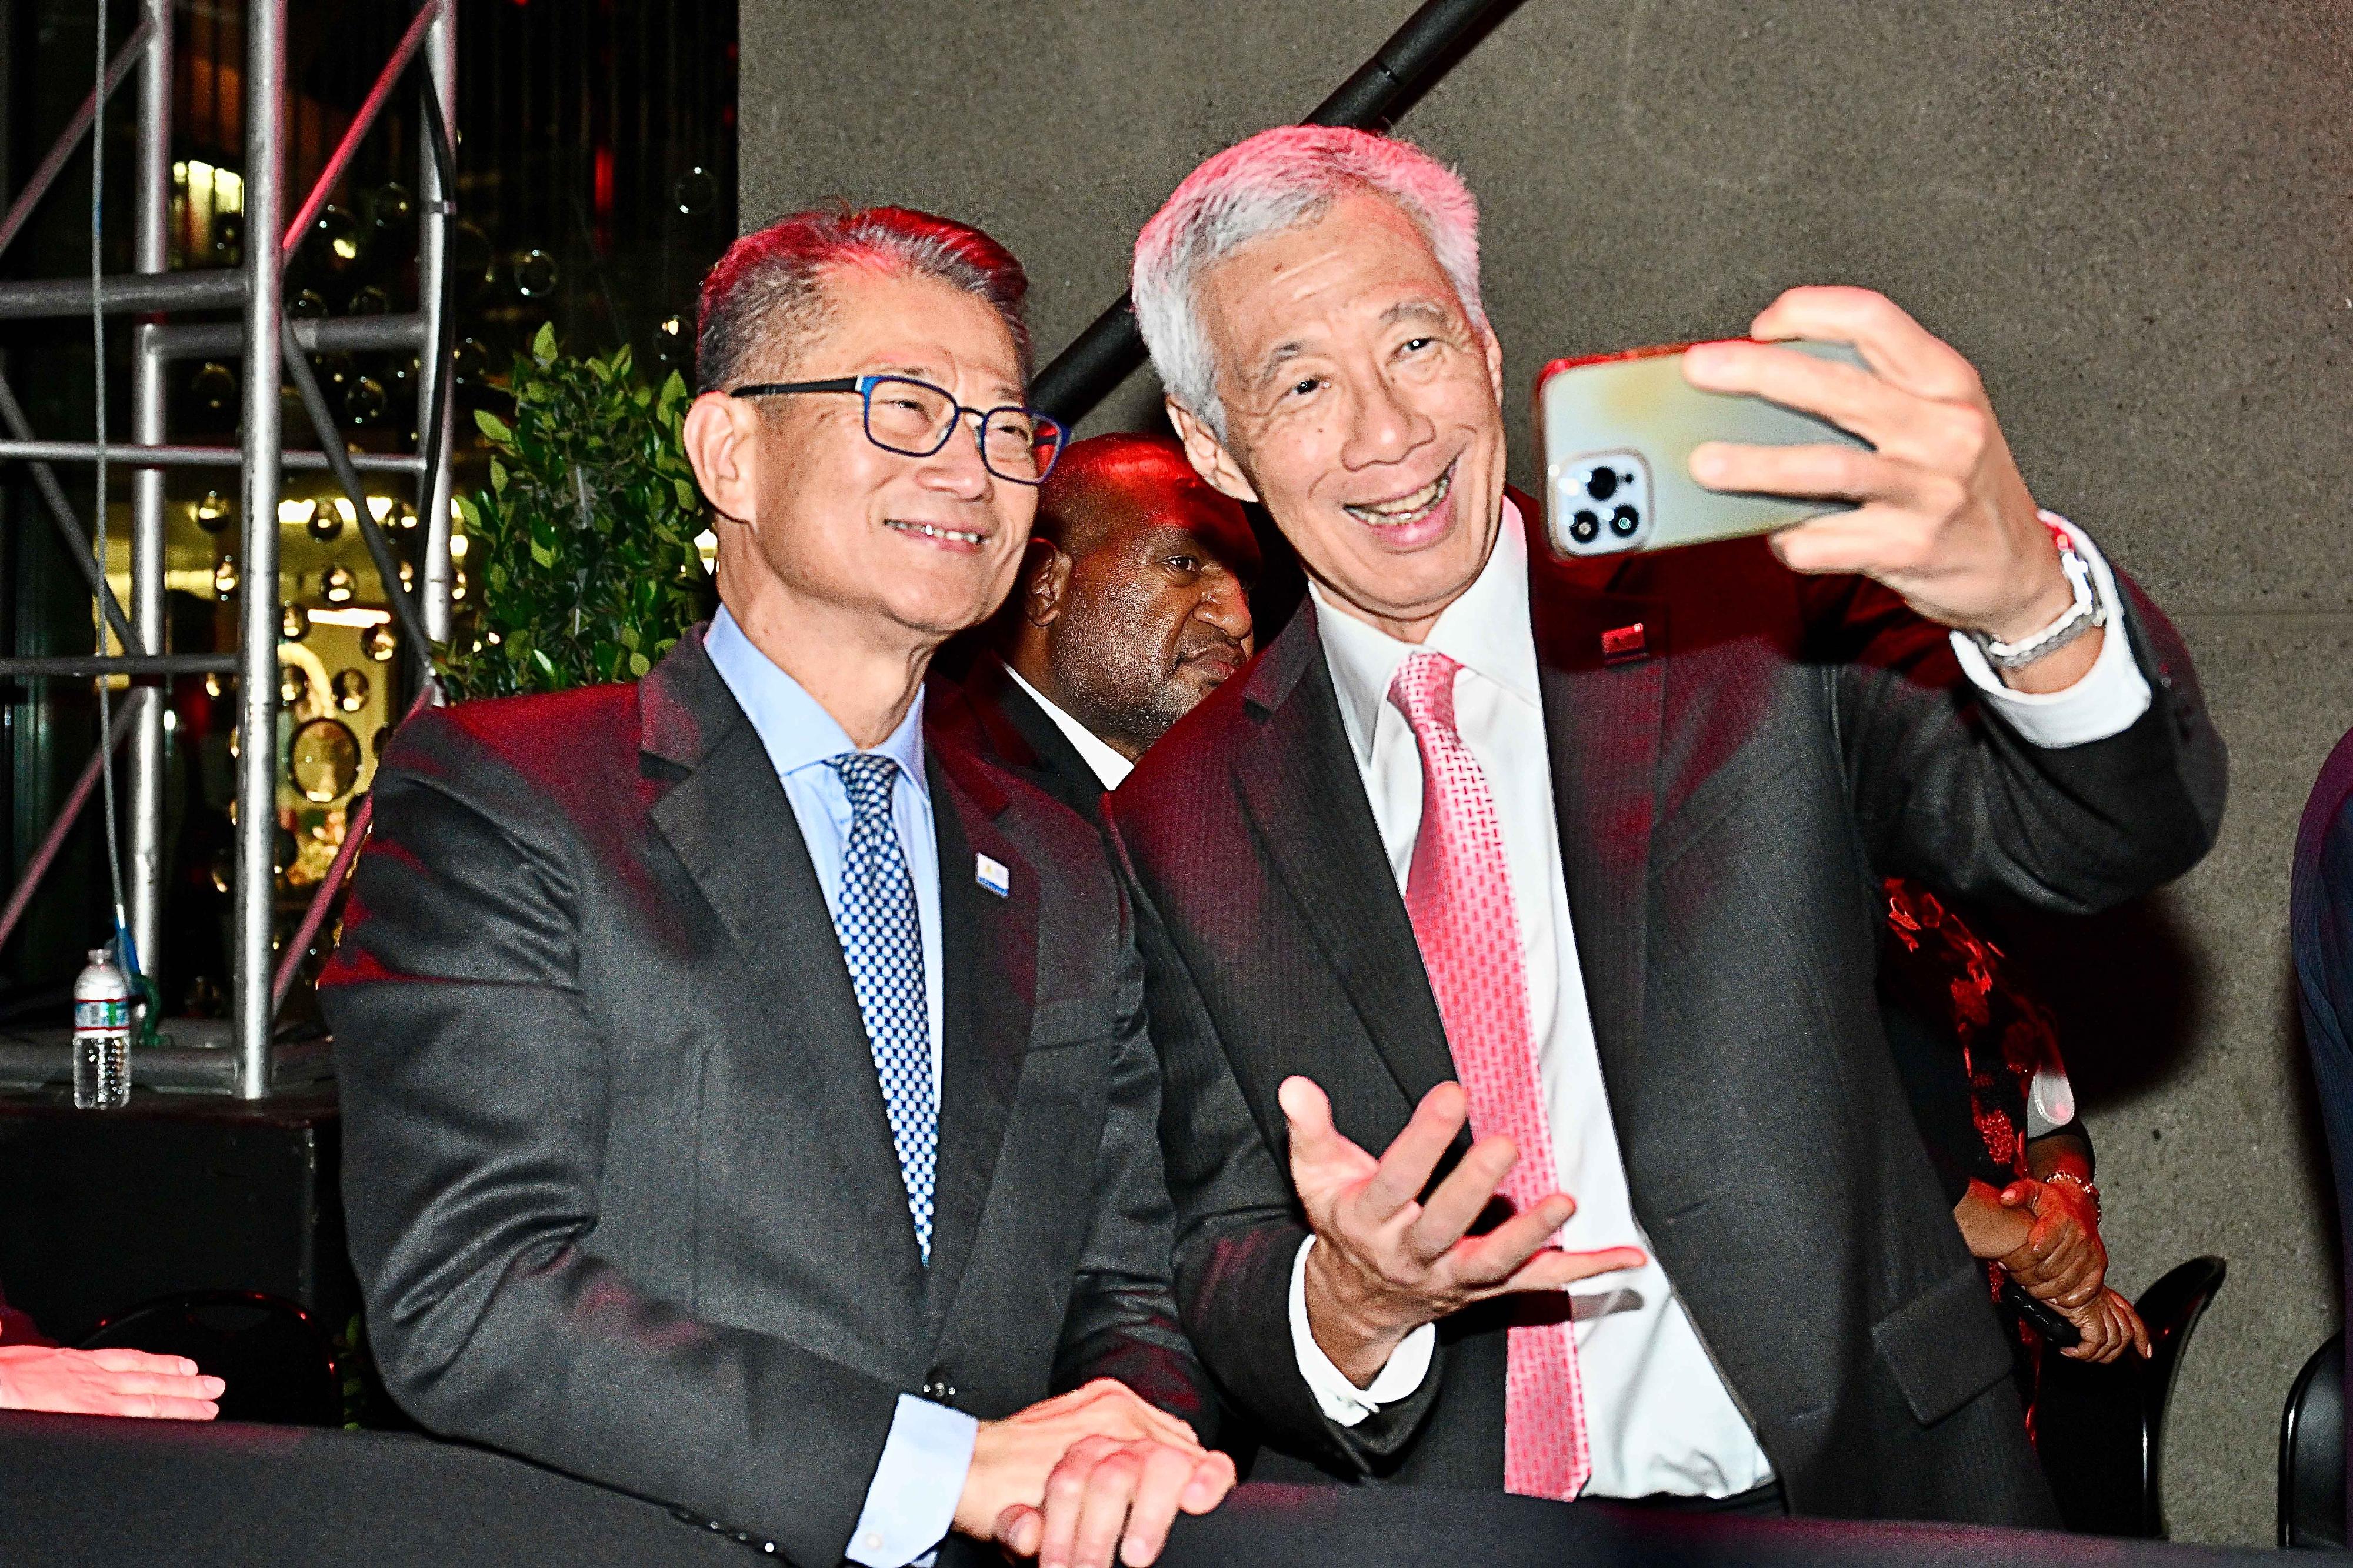 The Financial Secretary, Mr Paul Chan, attended the Asia-Pacific Economic Cooperation Economic Leaders' Meeting welcome reception and cultural performance in San Francisco, the United States, yesterday evening (November 15, San Francisco time). Photo shows Mr Chan (left) and the Prime Minister of Singapore, Mr Lee Hsien Loong (right), at the cultural performance.